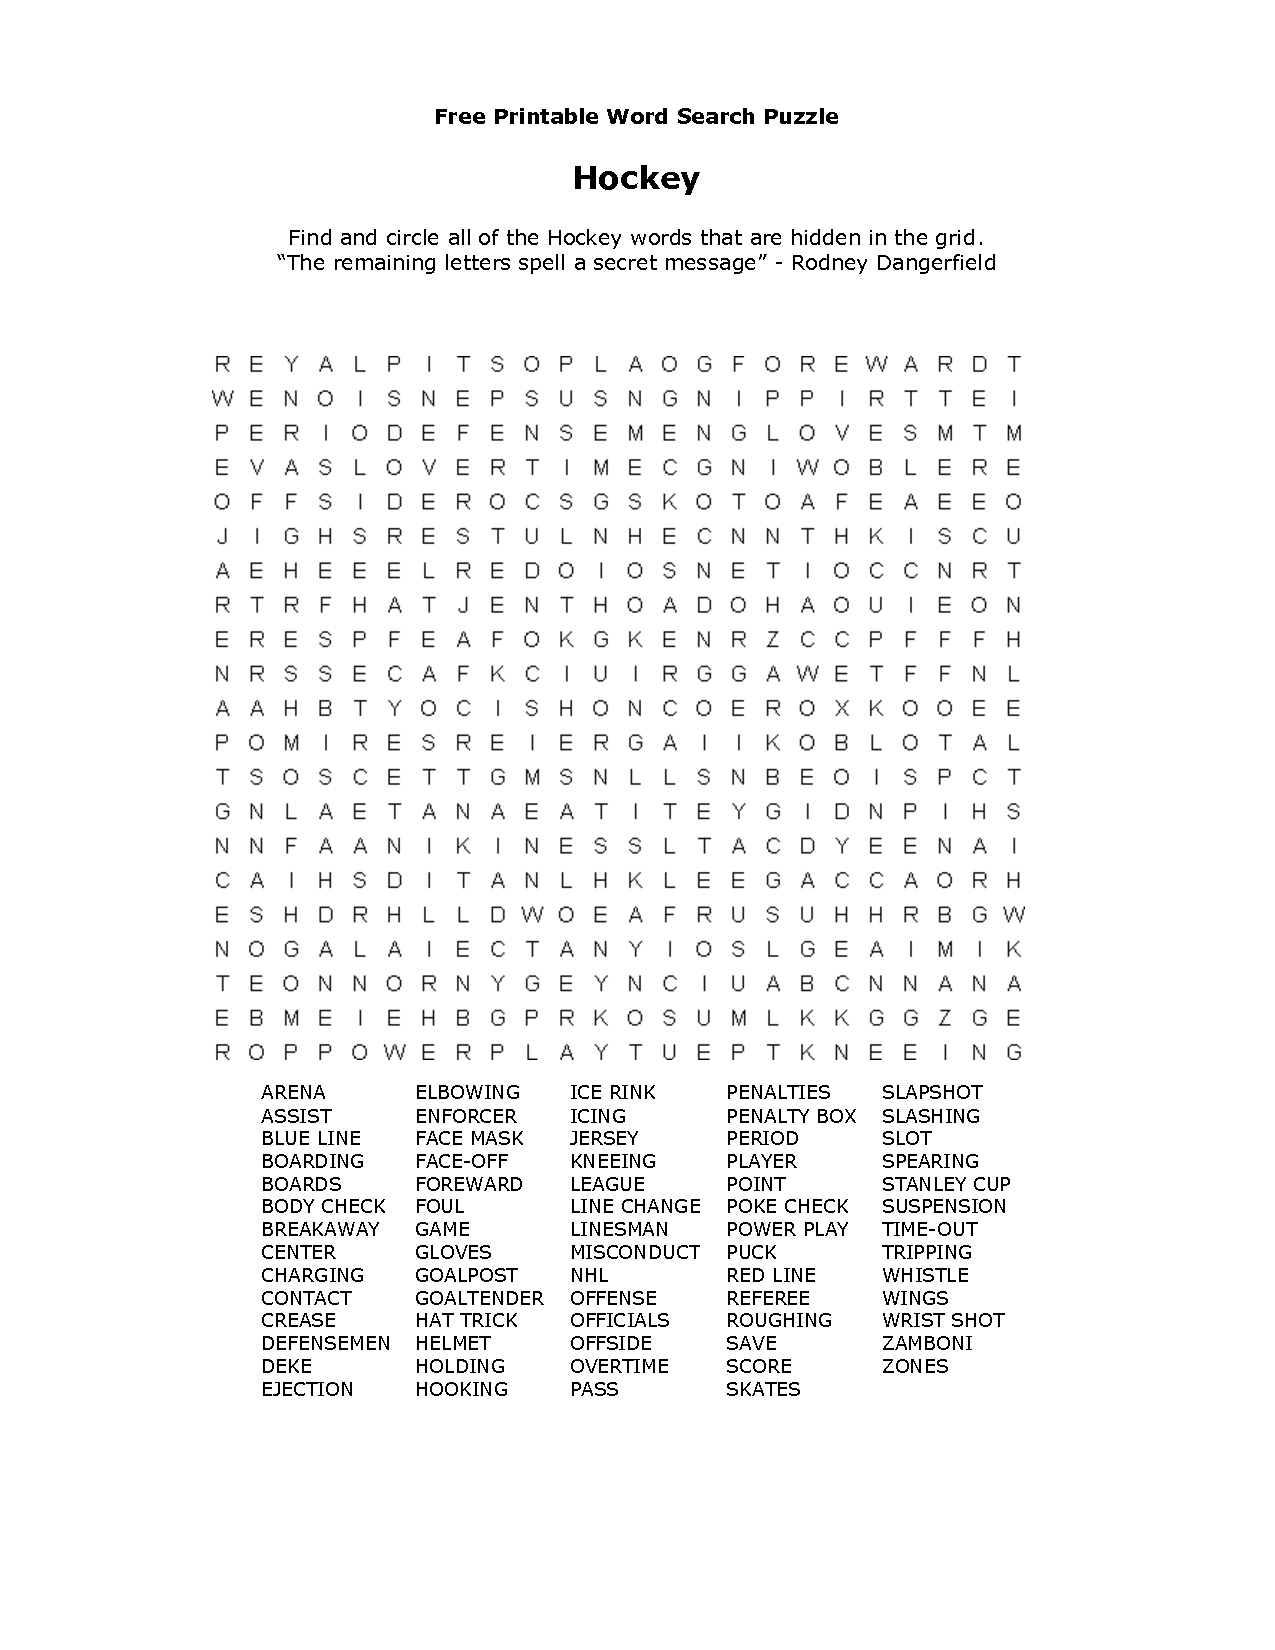 Chase Haake (20Haake02) On Pinterest - Free Printable Wwe Word Search